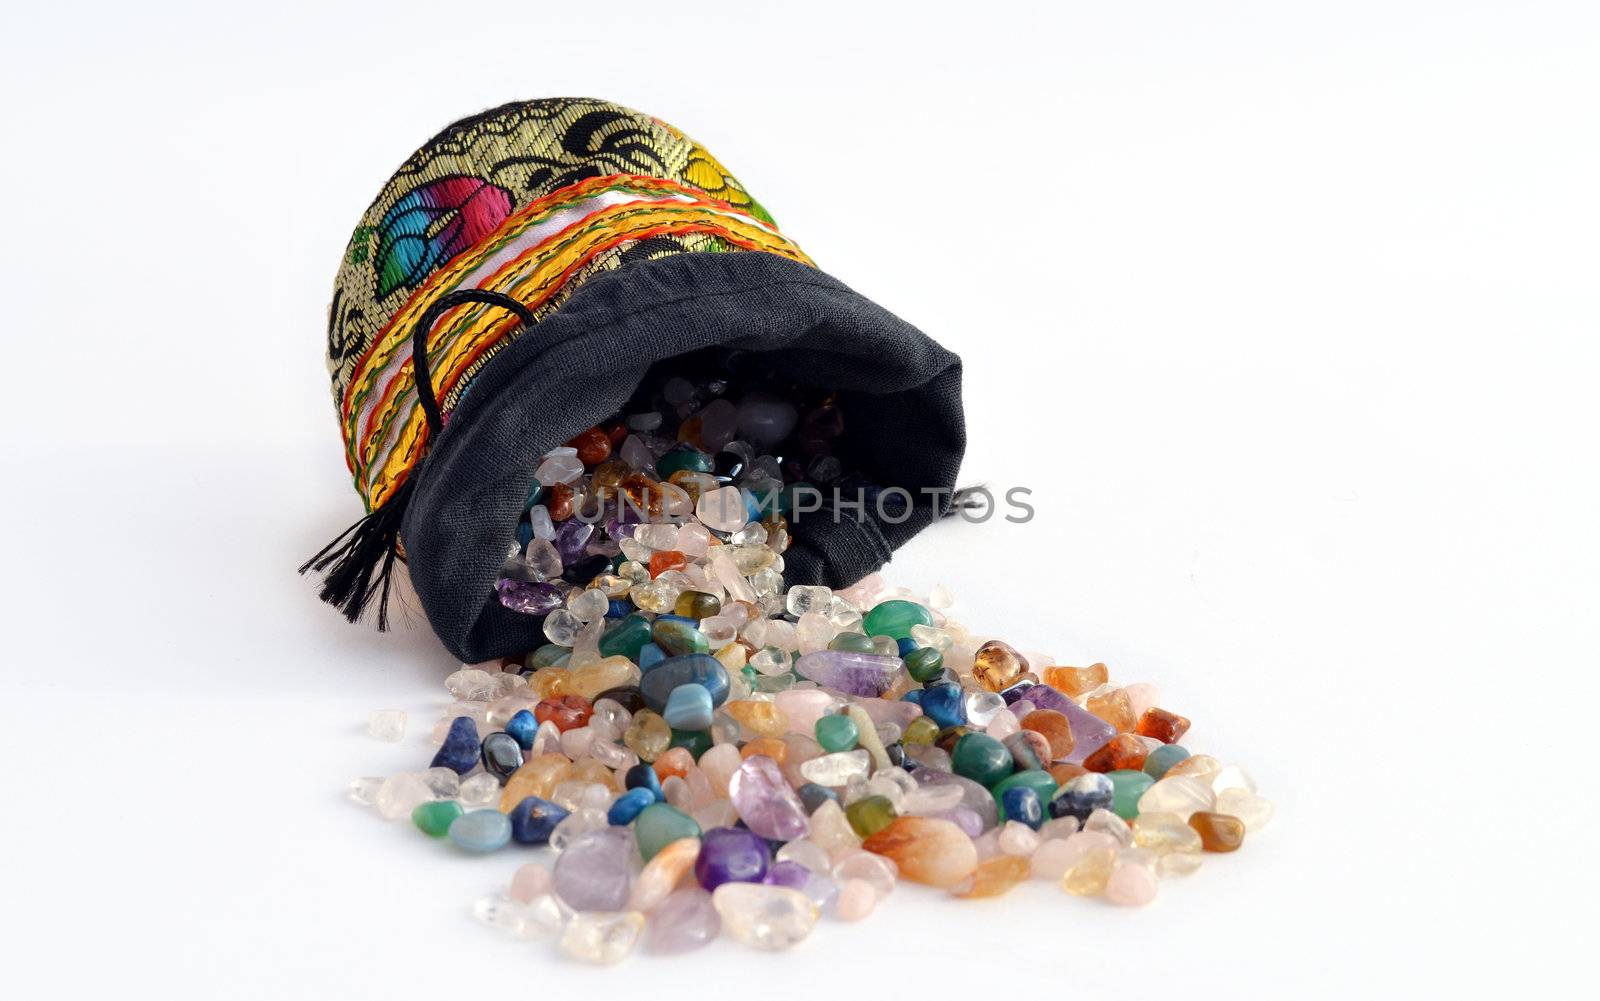 Quartz and other semiprecious pebbles pouring out of a decorated sacket 